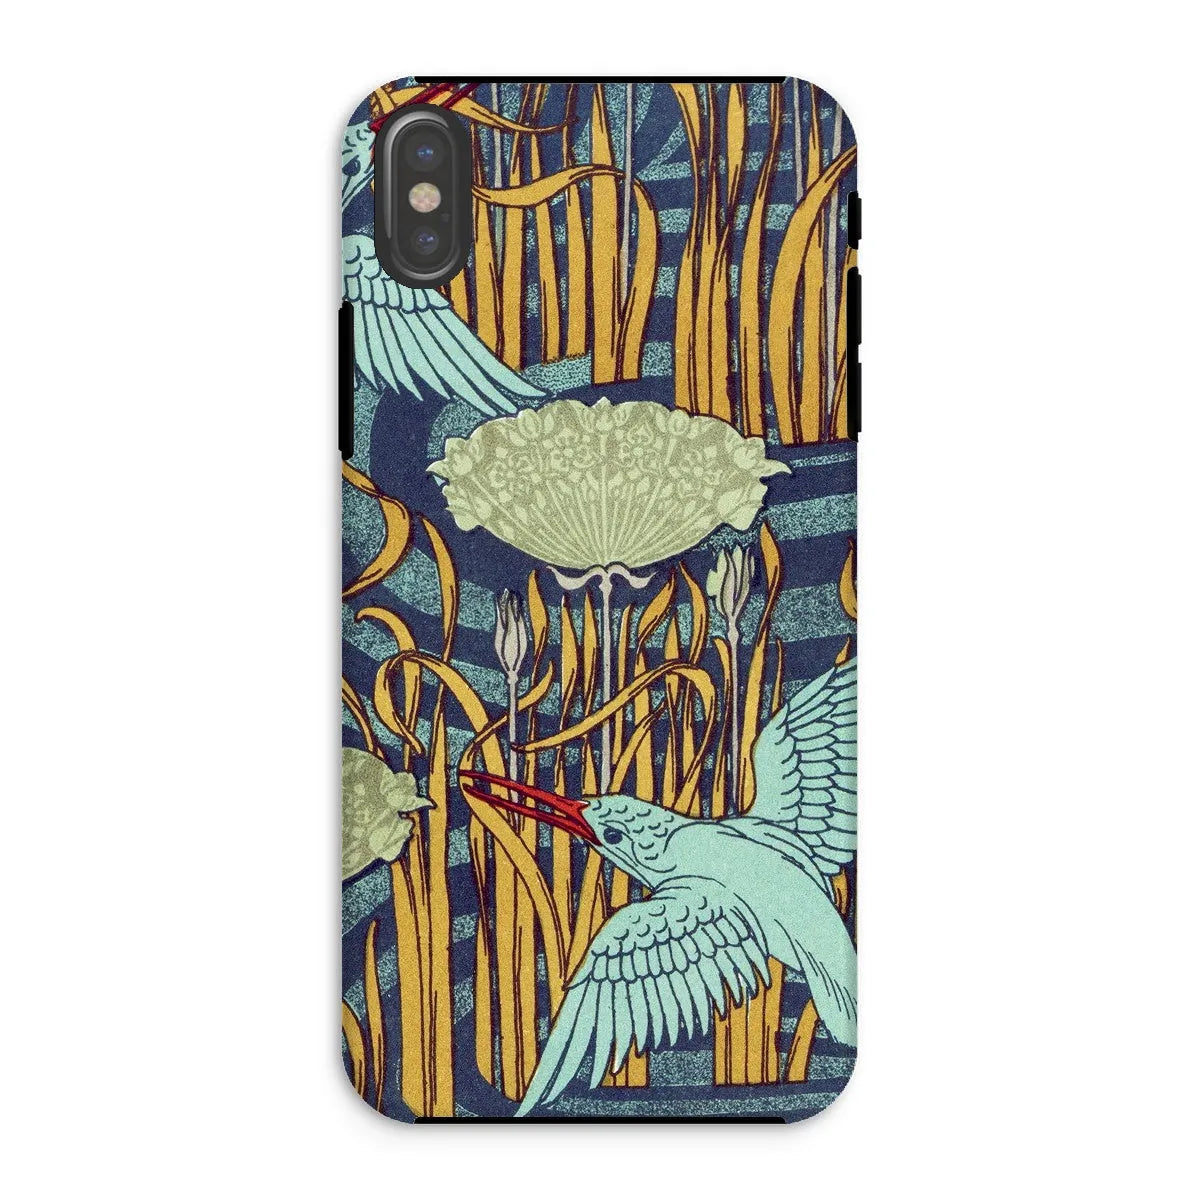 Kingfishers French Art Phone Case - Maurice Pillard Verneuil - Iphone Xs / Matte - Mobile Phone Cases - Aesthetic Art